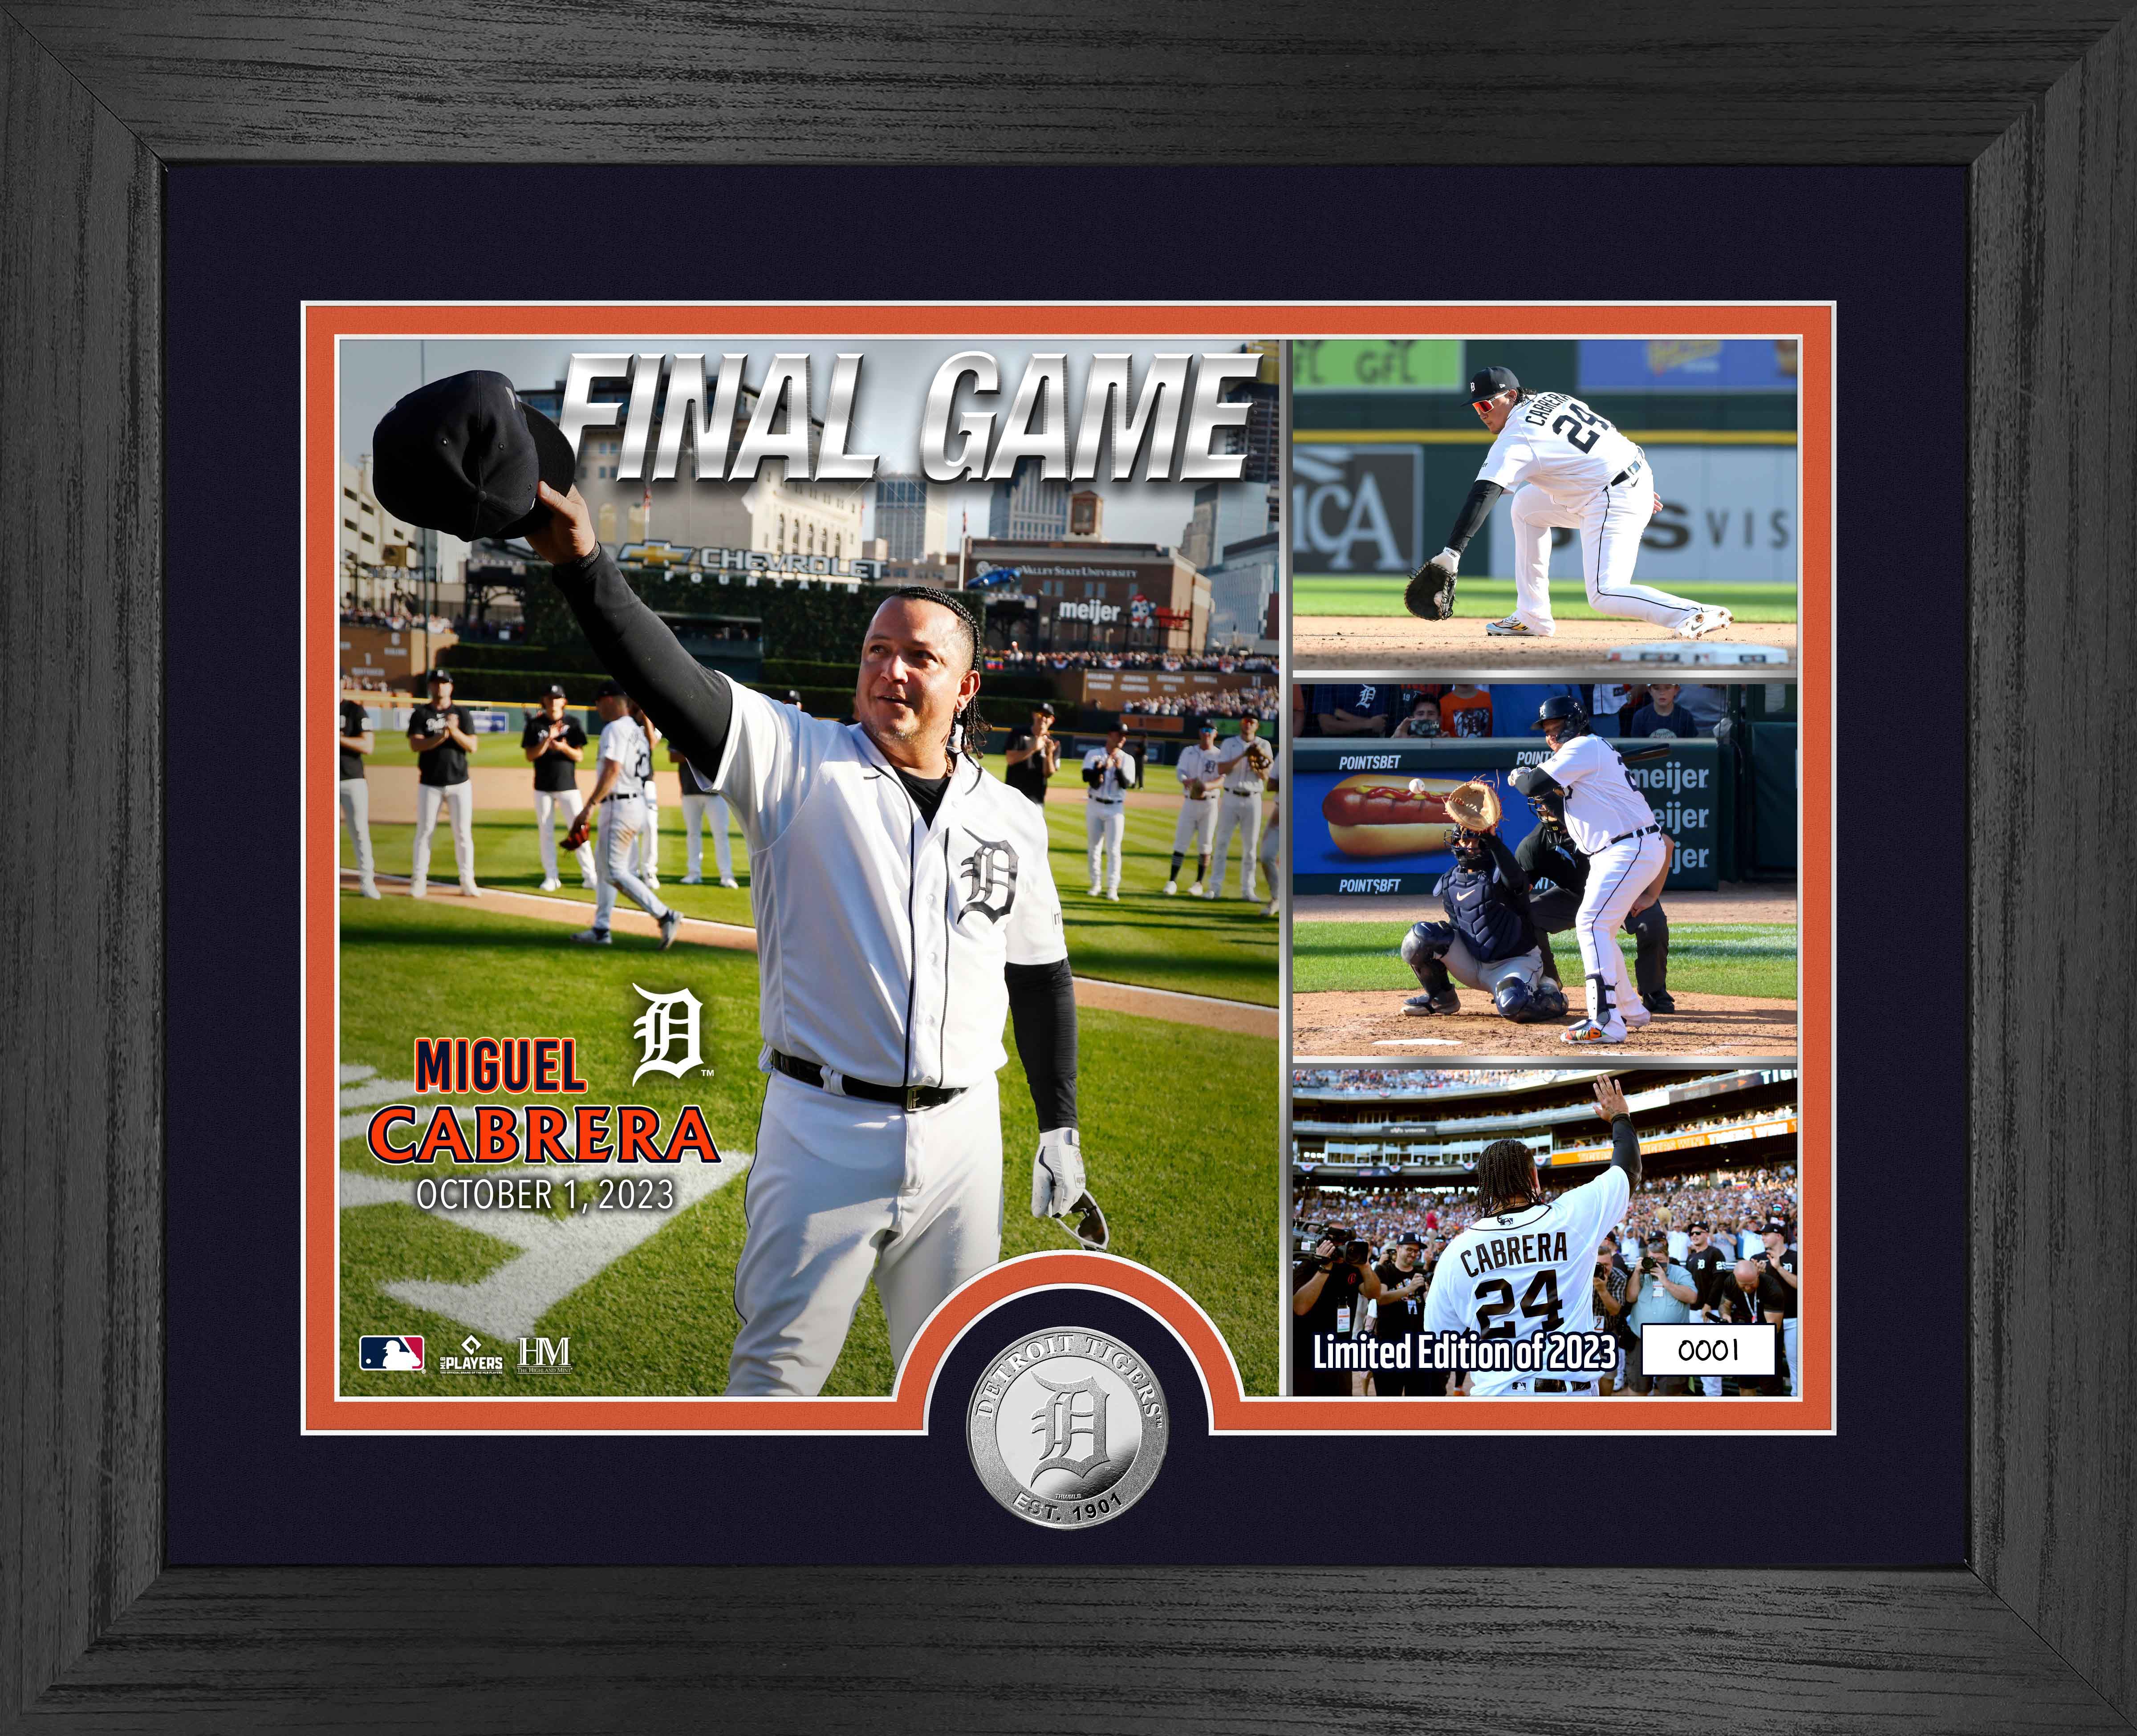 Miguel Cabrera Final Career Game Silver Coin Photo Mint